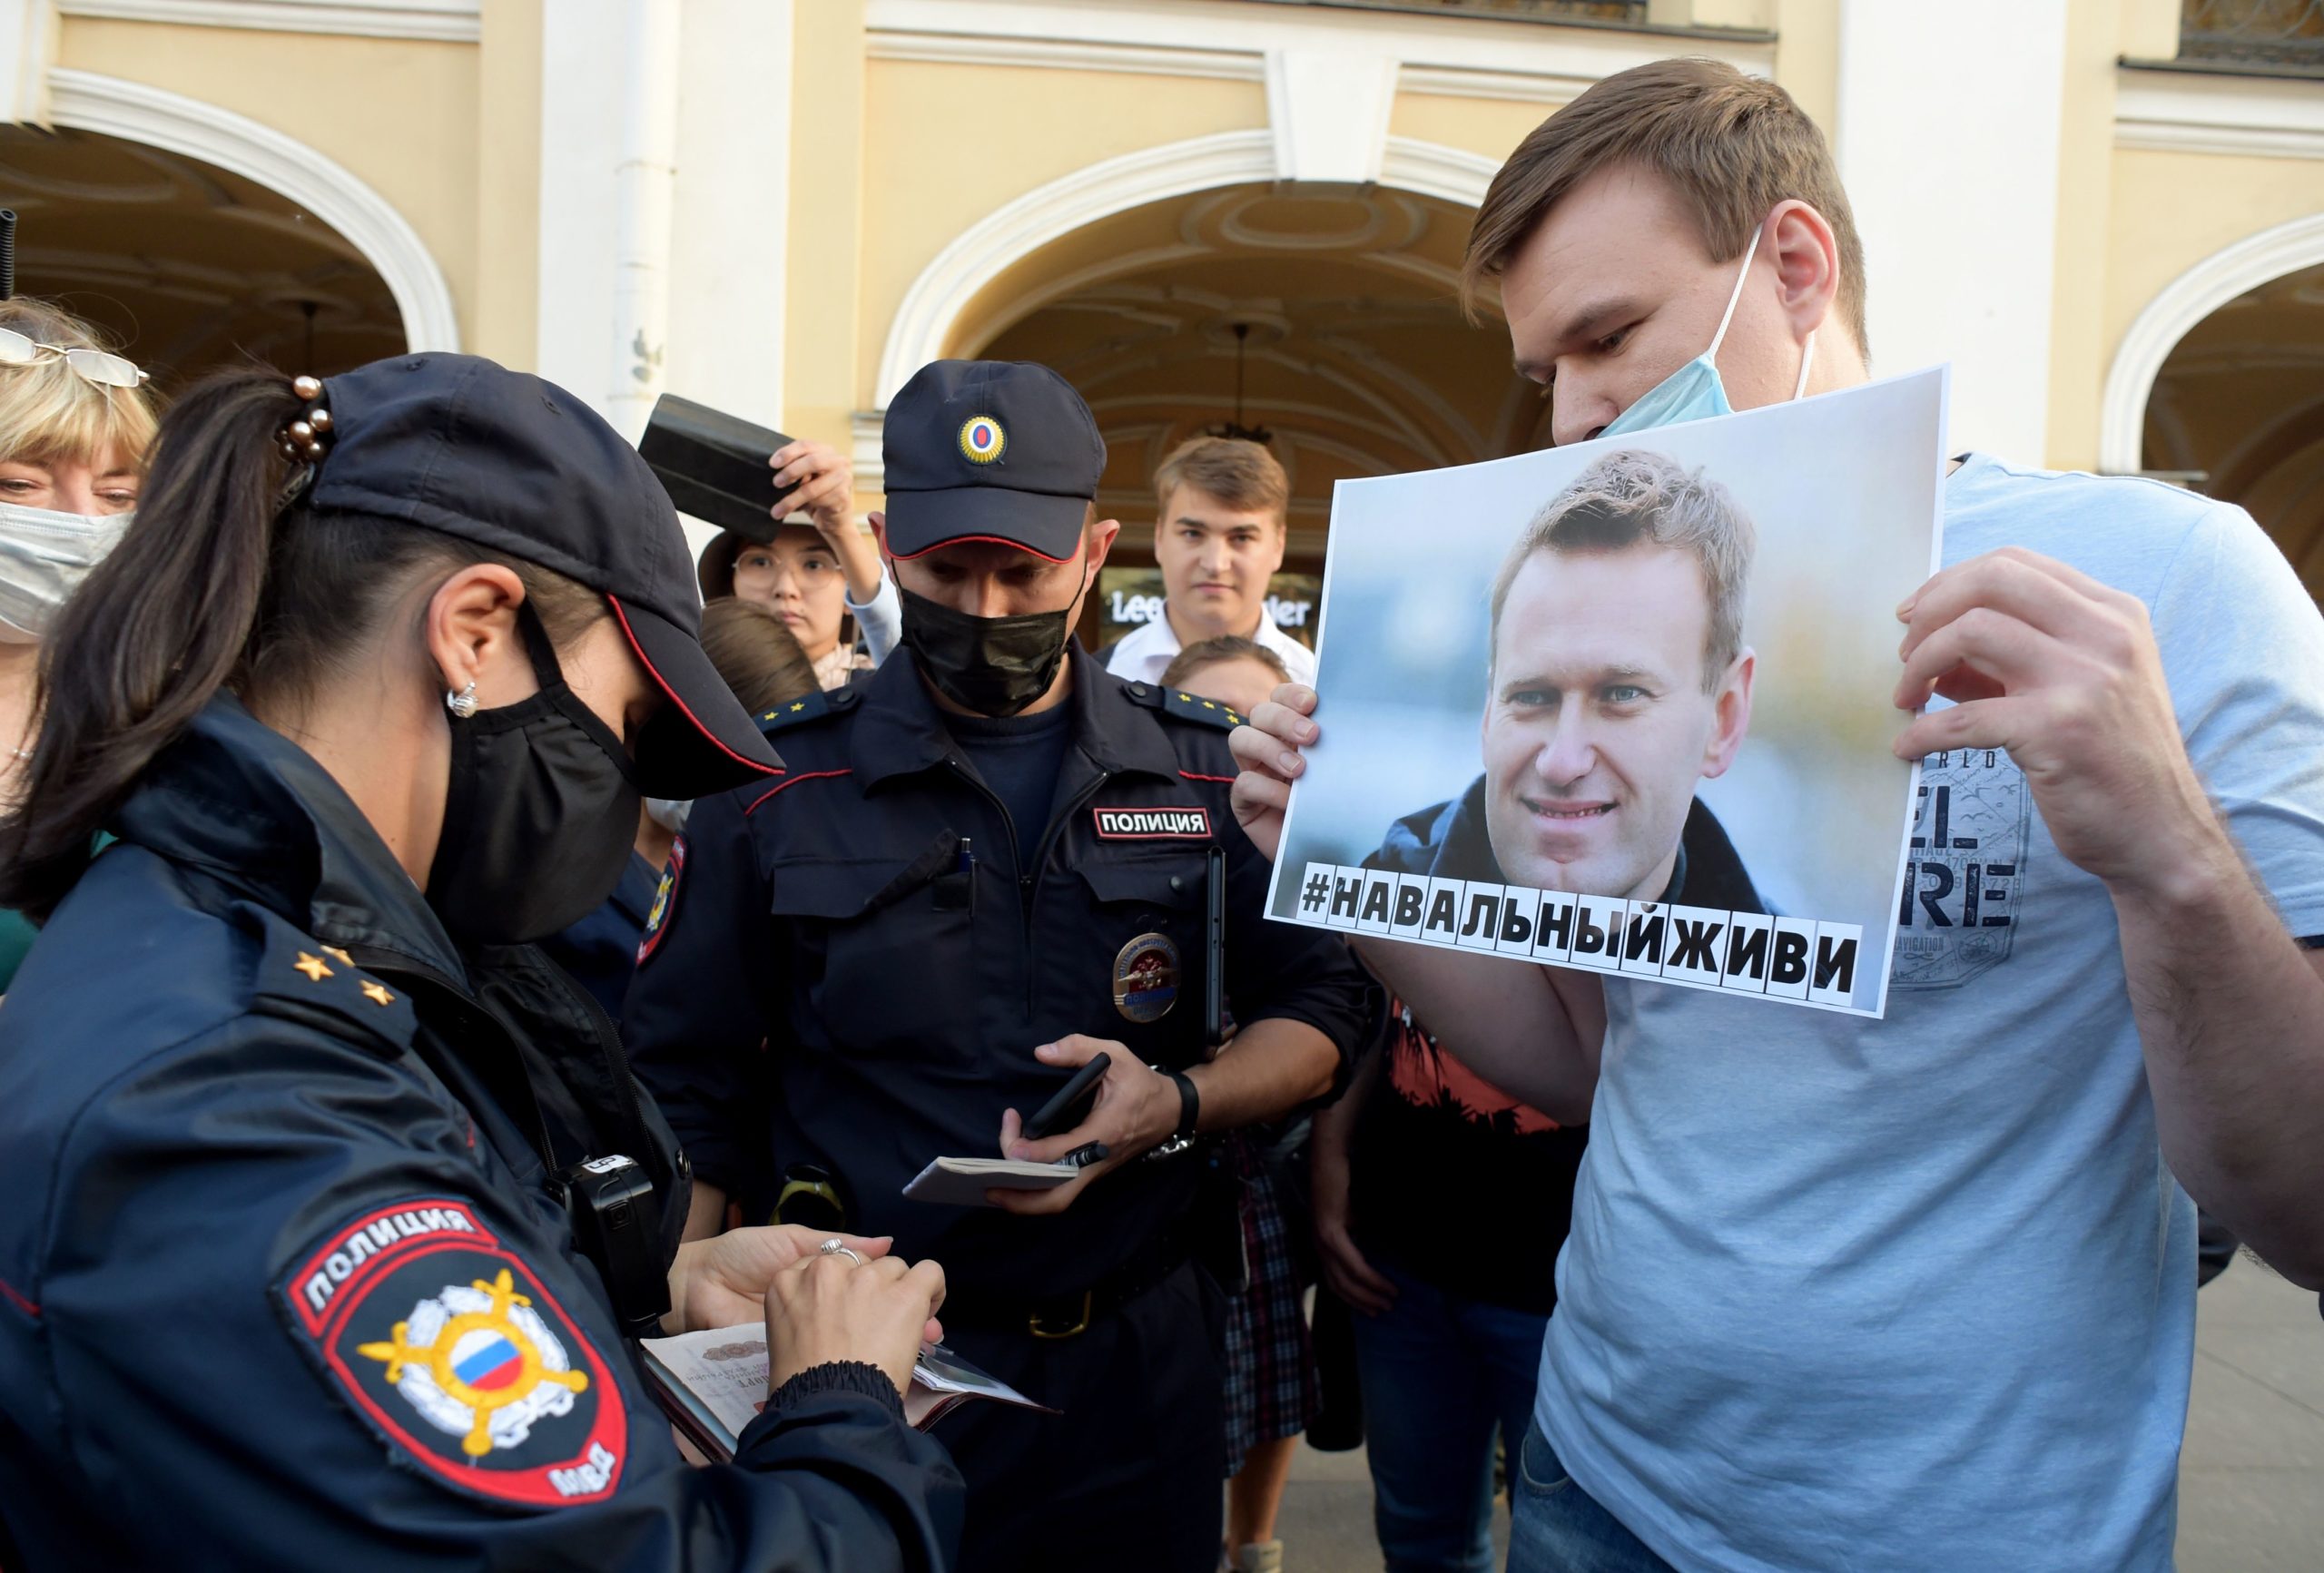 Police officers check documents of a man standing with a placard with an image of Alexei Navalny during a gathering to express support for the opposition leader after he was rushed to intensive care in Siberia suffering from what his spokeswoman said was a suspected poisoning, in downtown Saint Petersburg on August 20, 2020. (Olga Maltseva/AFP via Getty Images)